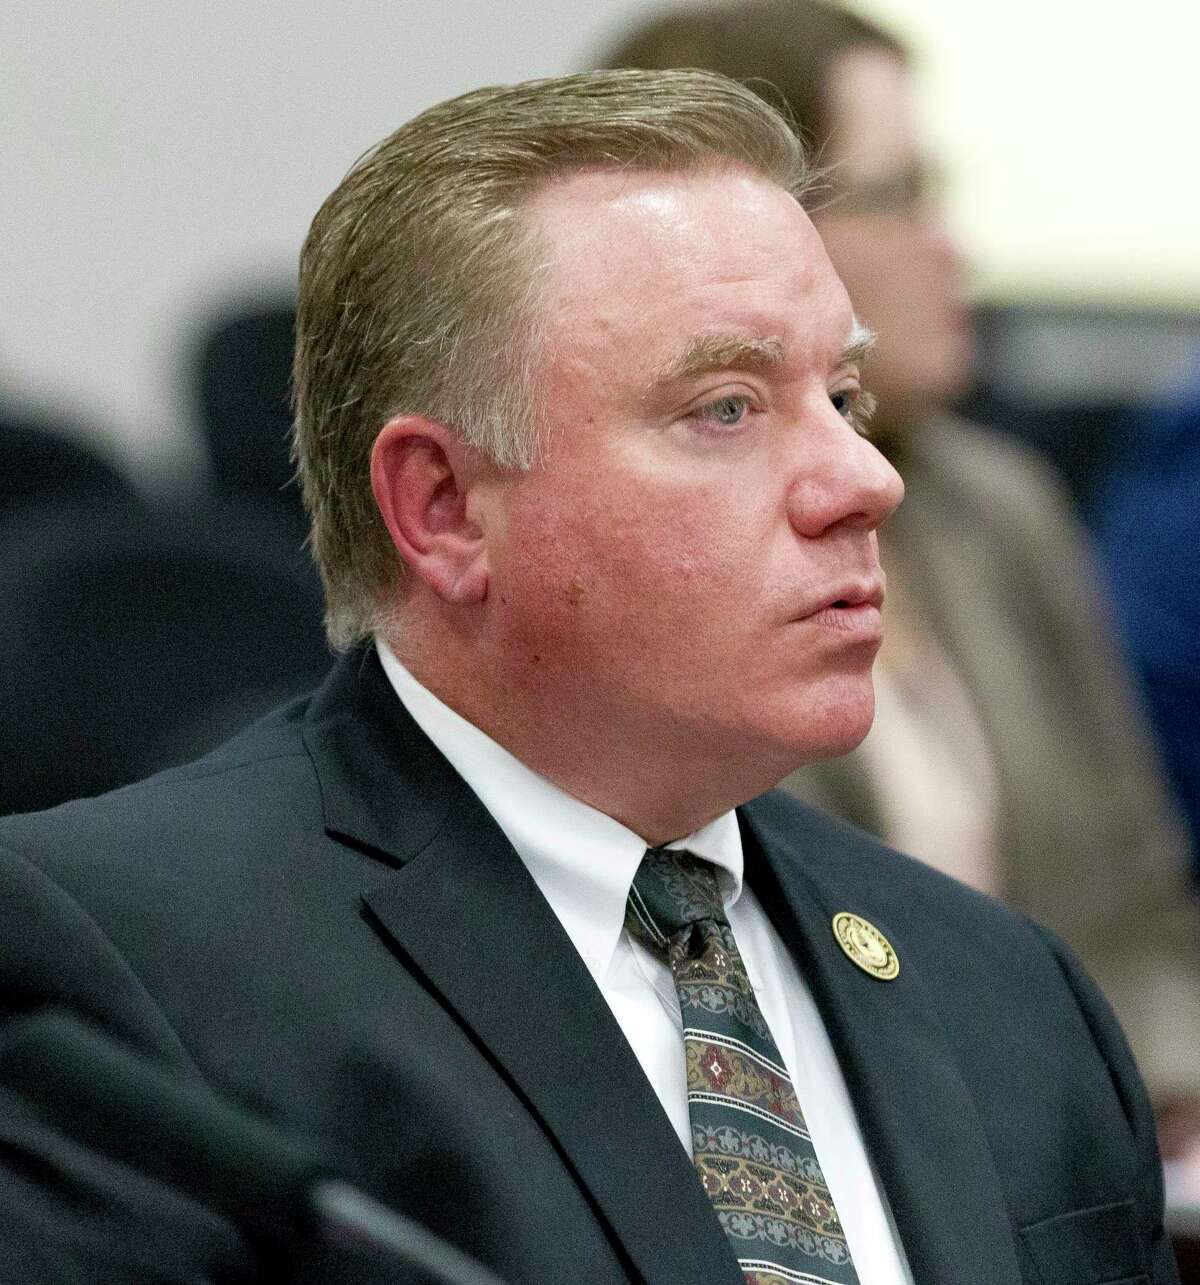 Former Conroe official Tommy Woolley showed favoritism toward an employee and did nothing to resolve concerns of colleagues who made assumptions about their relationship, according to a report released by the city. Woolley, who resigned last week amid the threat of being fired, "has shown himself unwilling or unable to manage his department and his behavior toward (the employee)," said the 23-page report filed after a monthlong investigation prompted by complaints from several of Woolley's colleagues.  